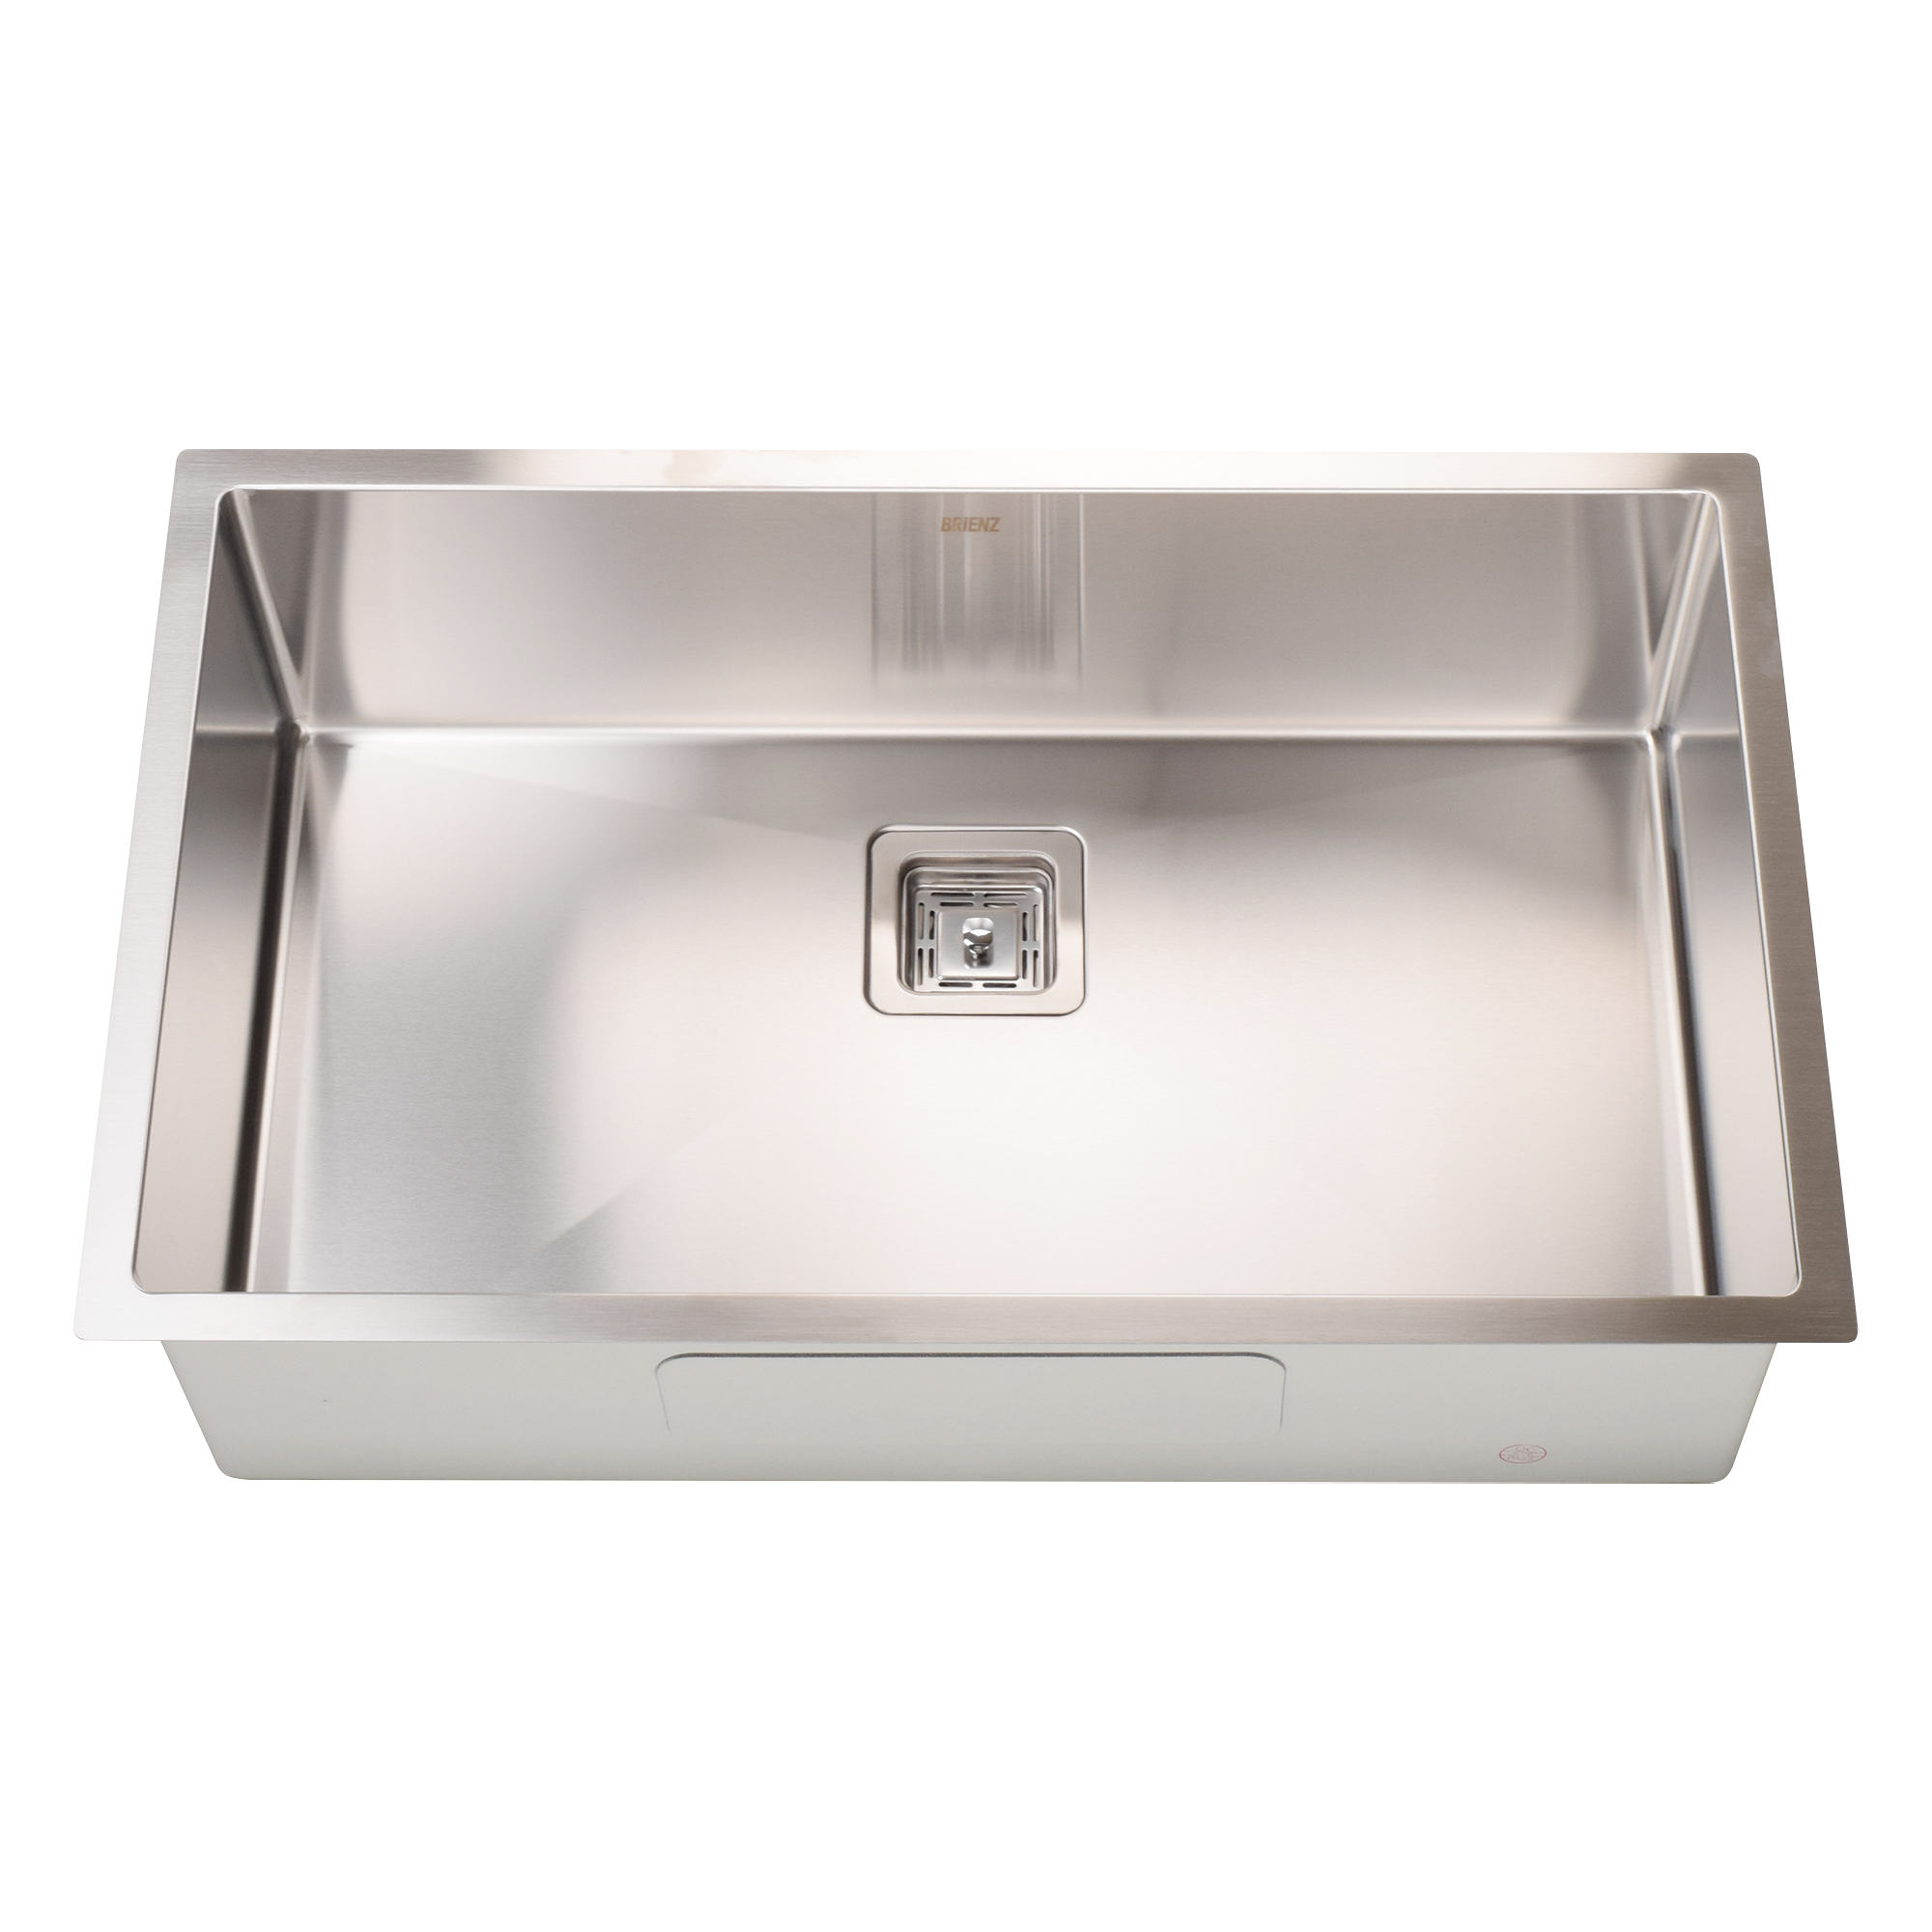 square stainless kitchen sink